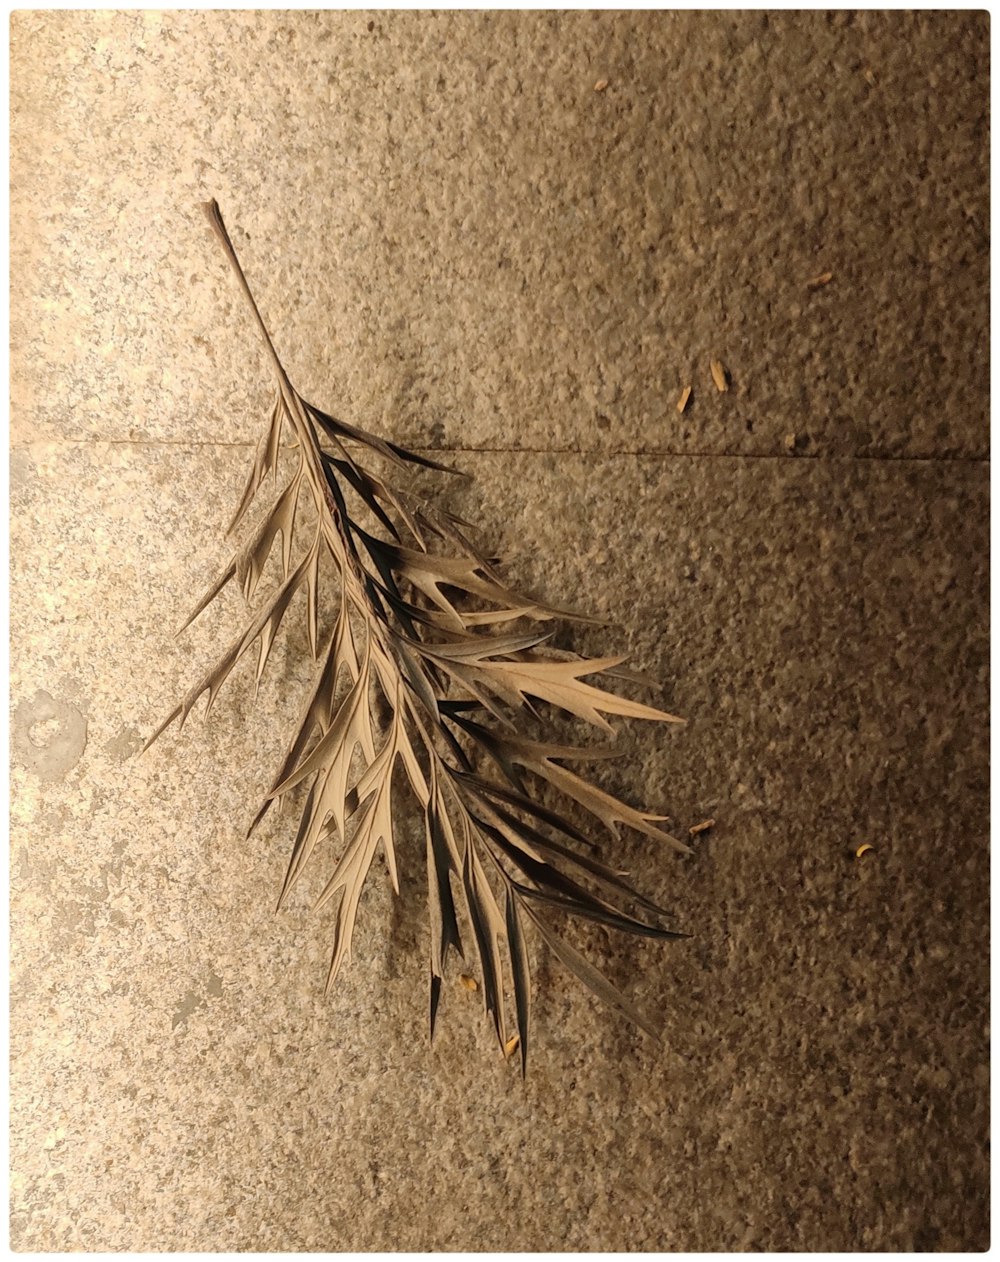 a dried plant laying on the ground